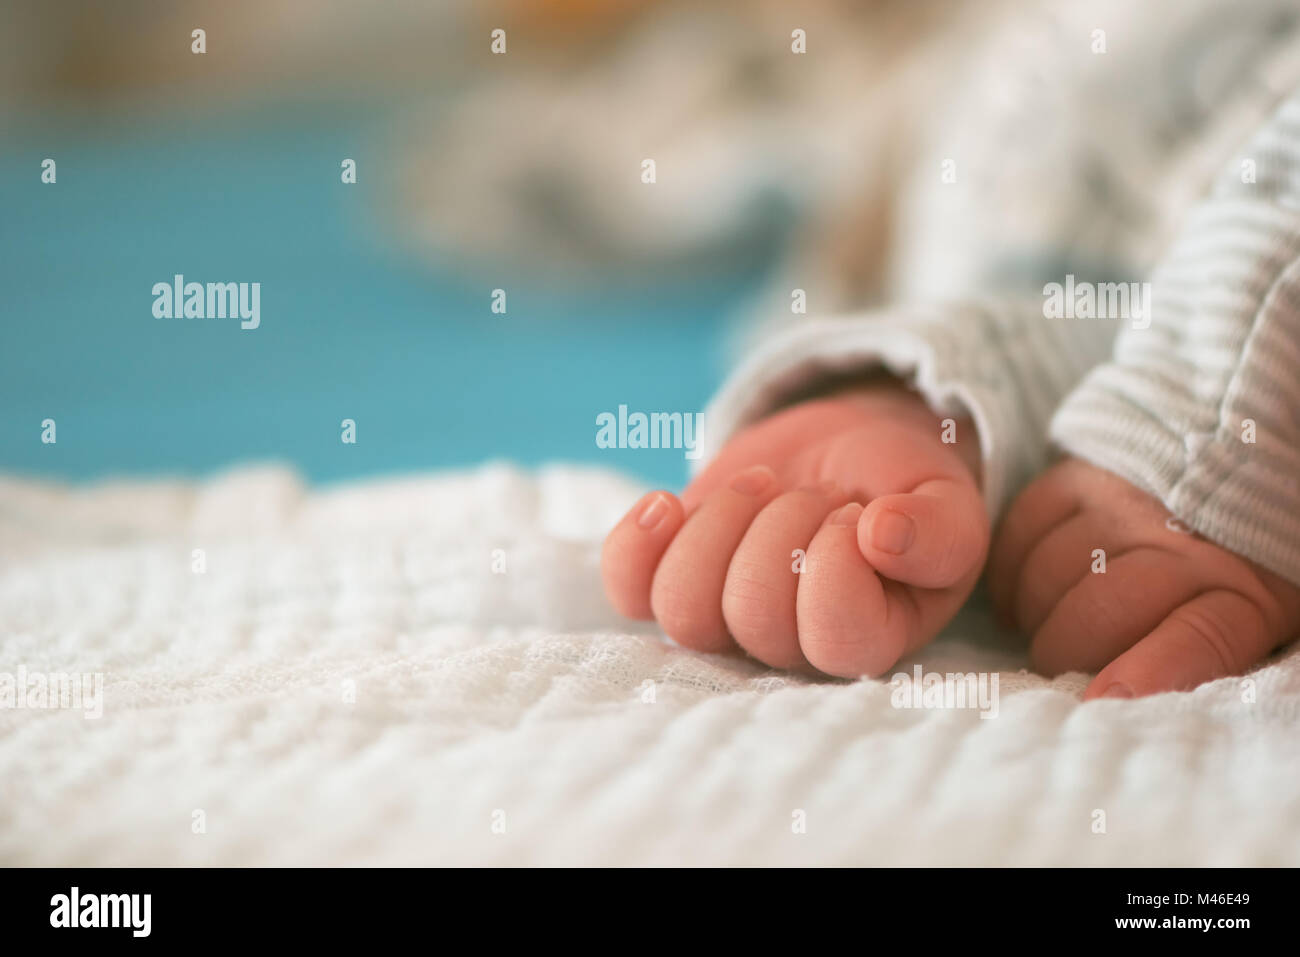 Newborn baby hands close up with selective focus Stock Photo